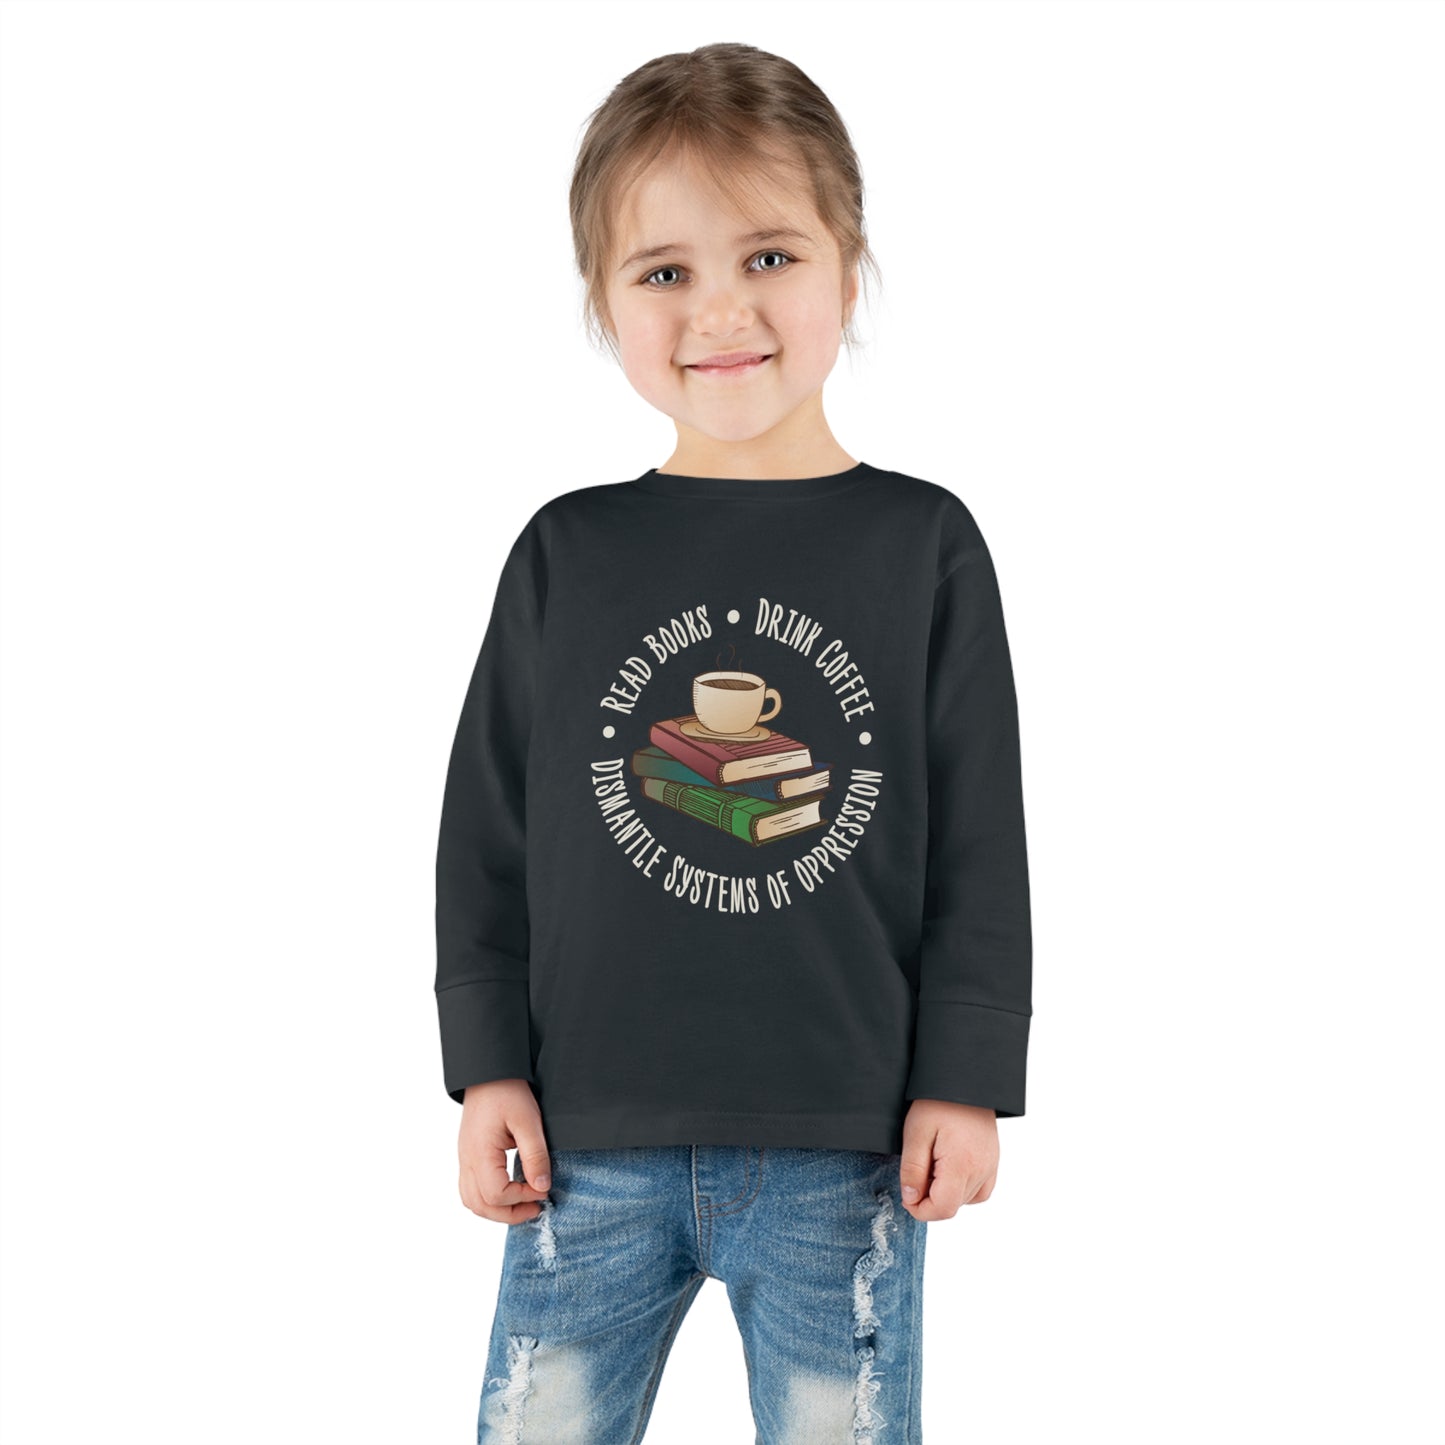 “Dismantle Systems of Oppression” Toddler Long Sleeve Tee